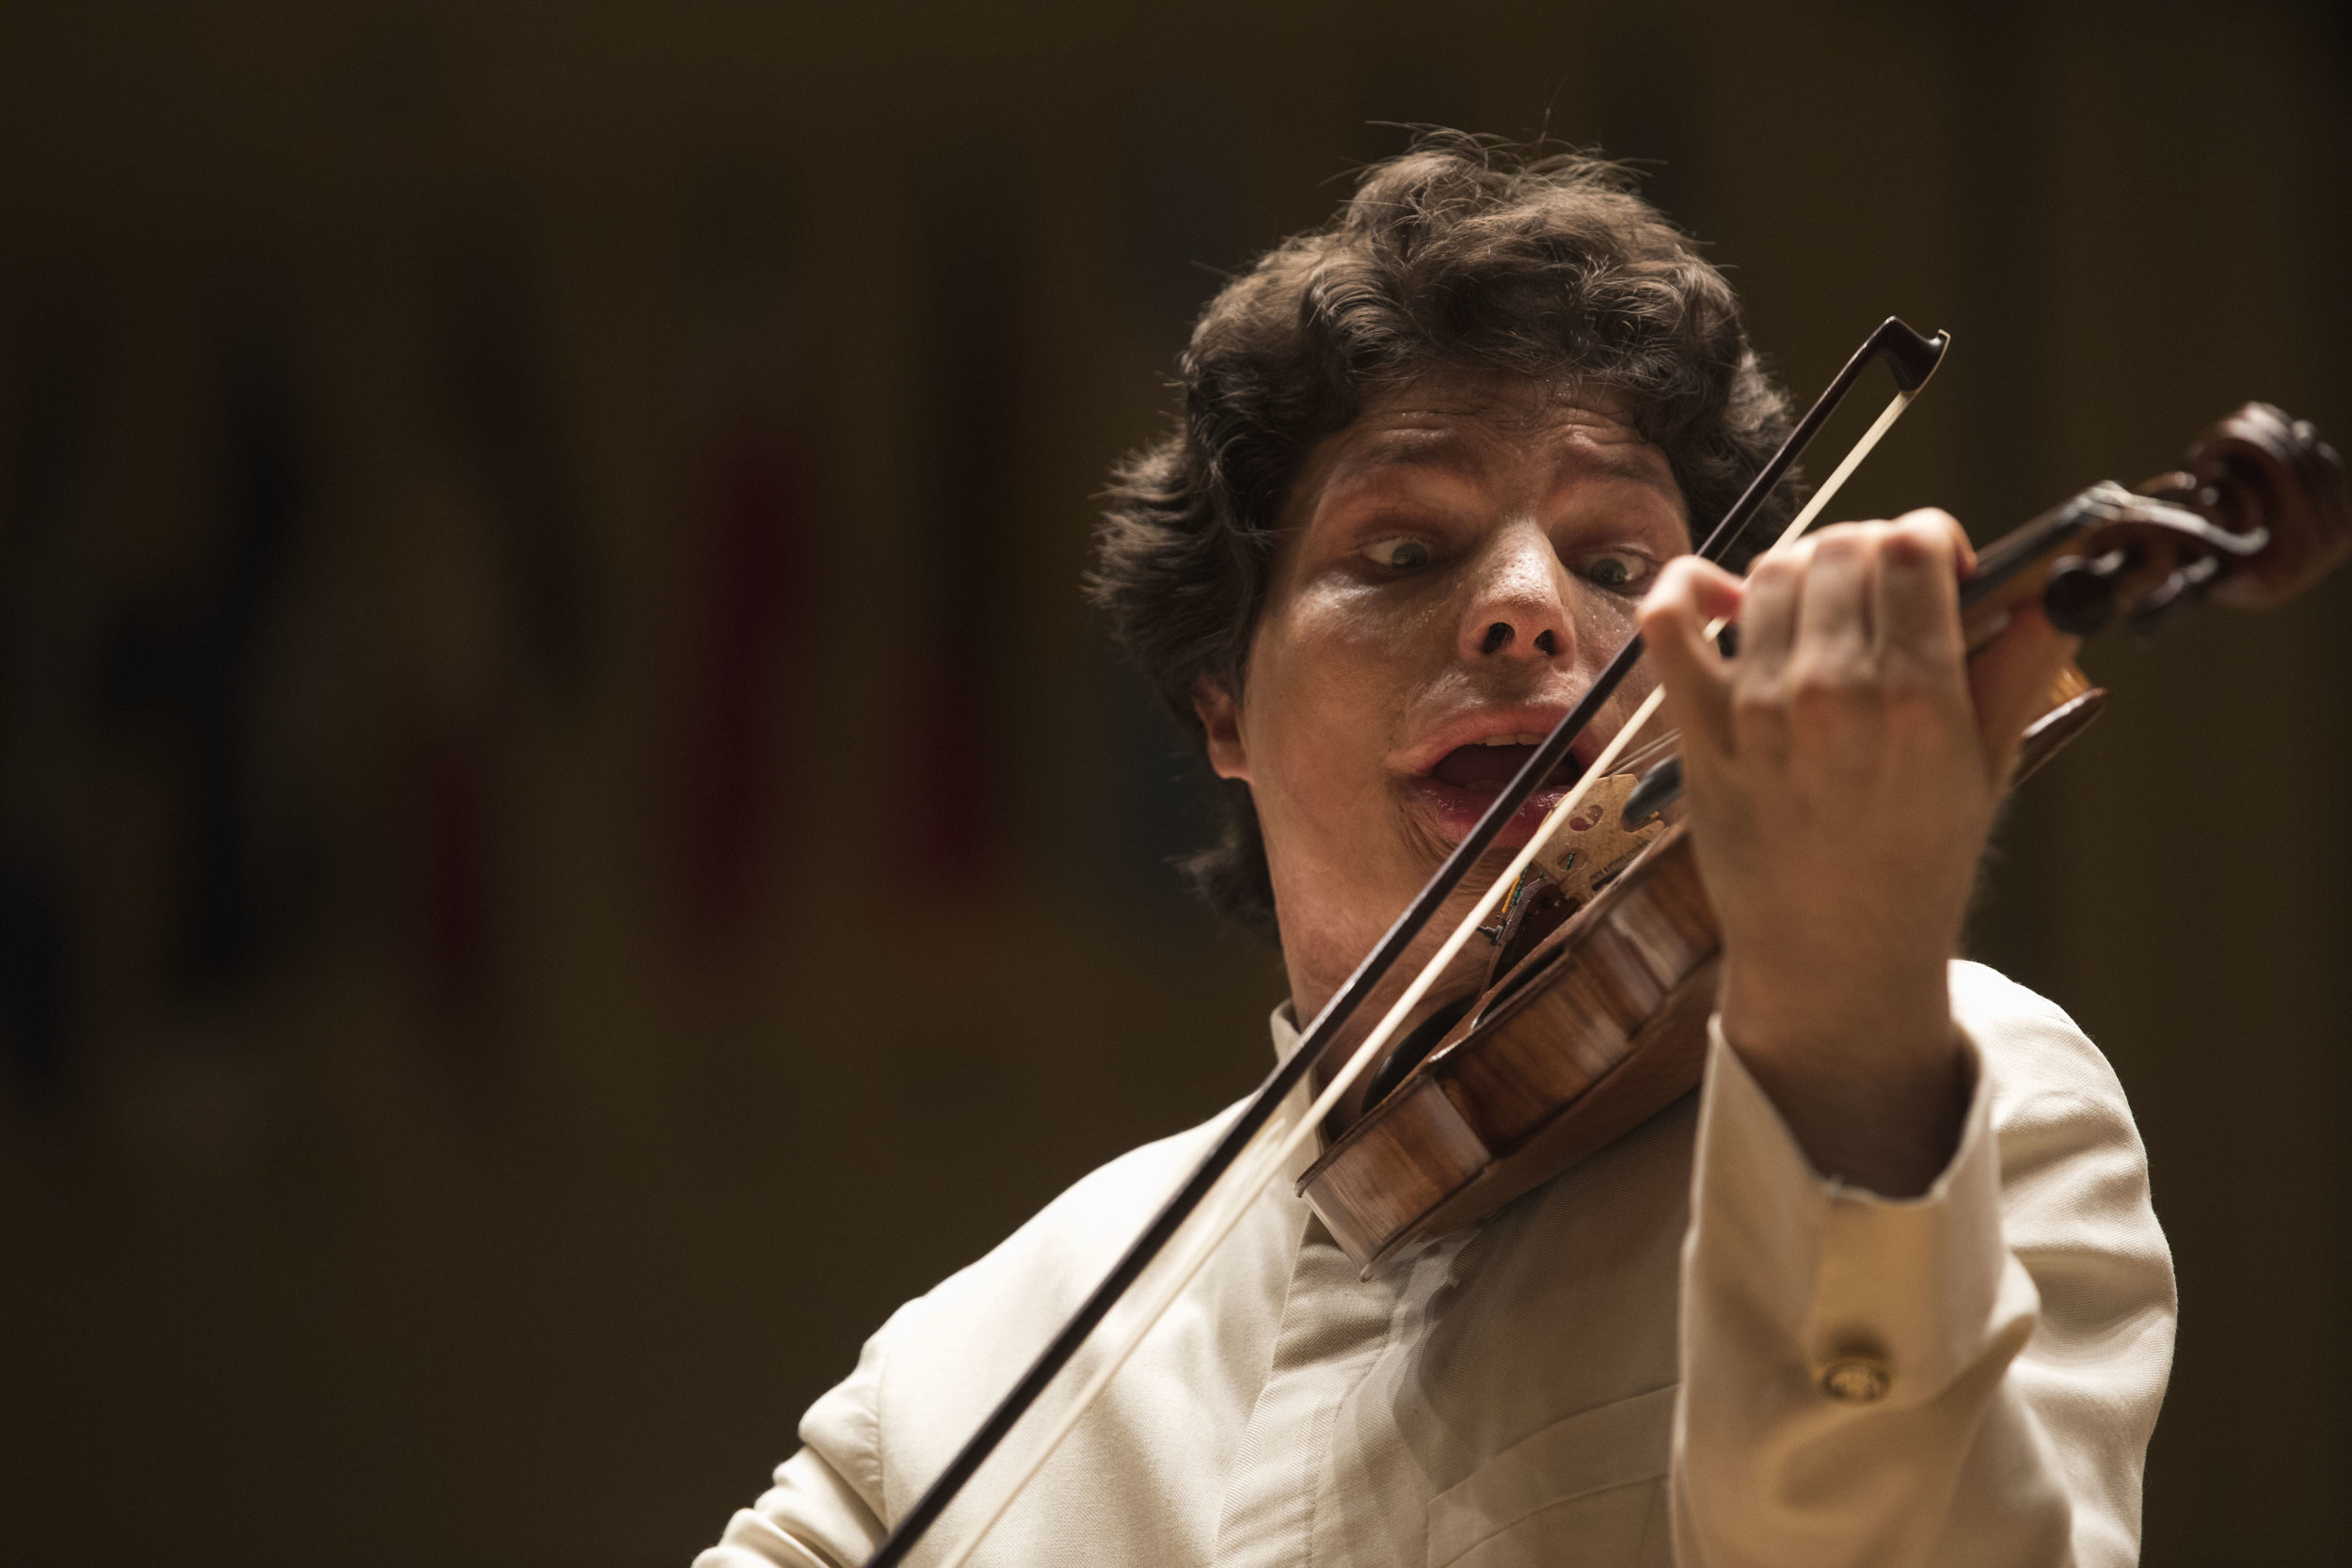  Augustin Hadelich plays "Violin Concerto in D major, op. 35" with Rossen Milanov conducting the Chautauqua Symphony Orchestra during the season finale on Tuesday, Aug. 22, 2017 in the Amphitheater.&nbsp; 